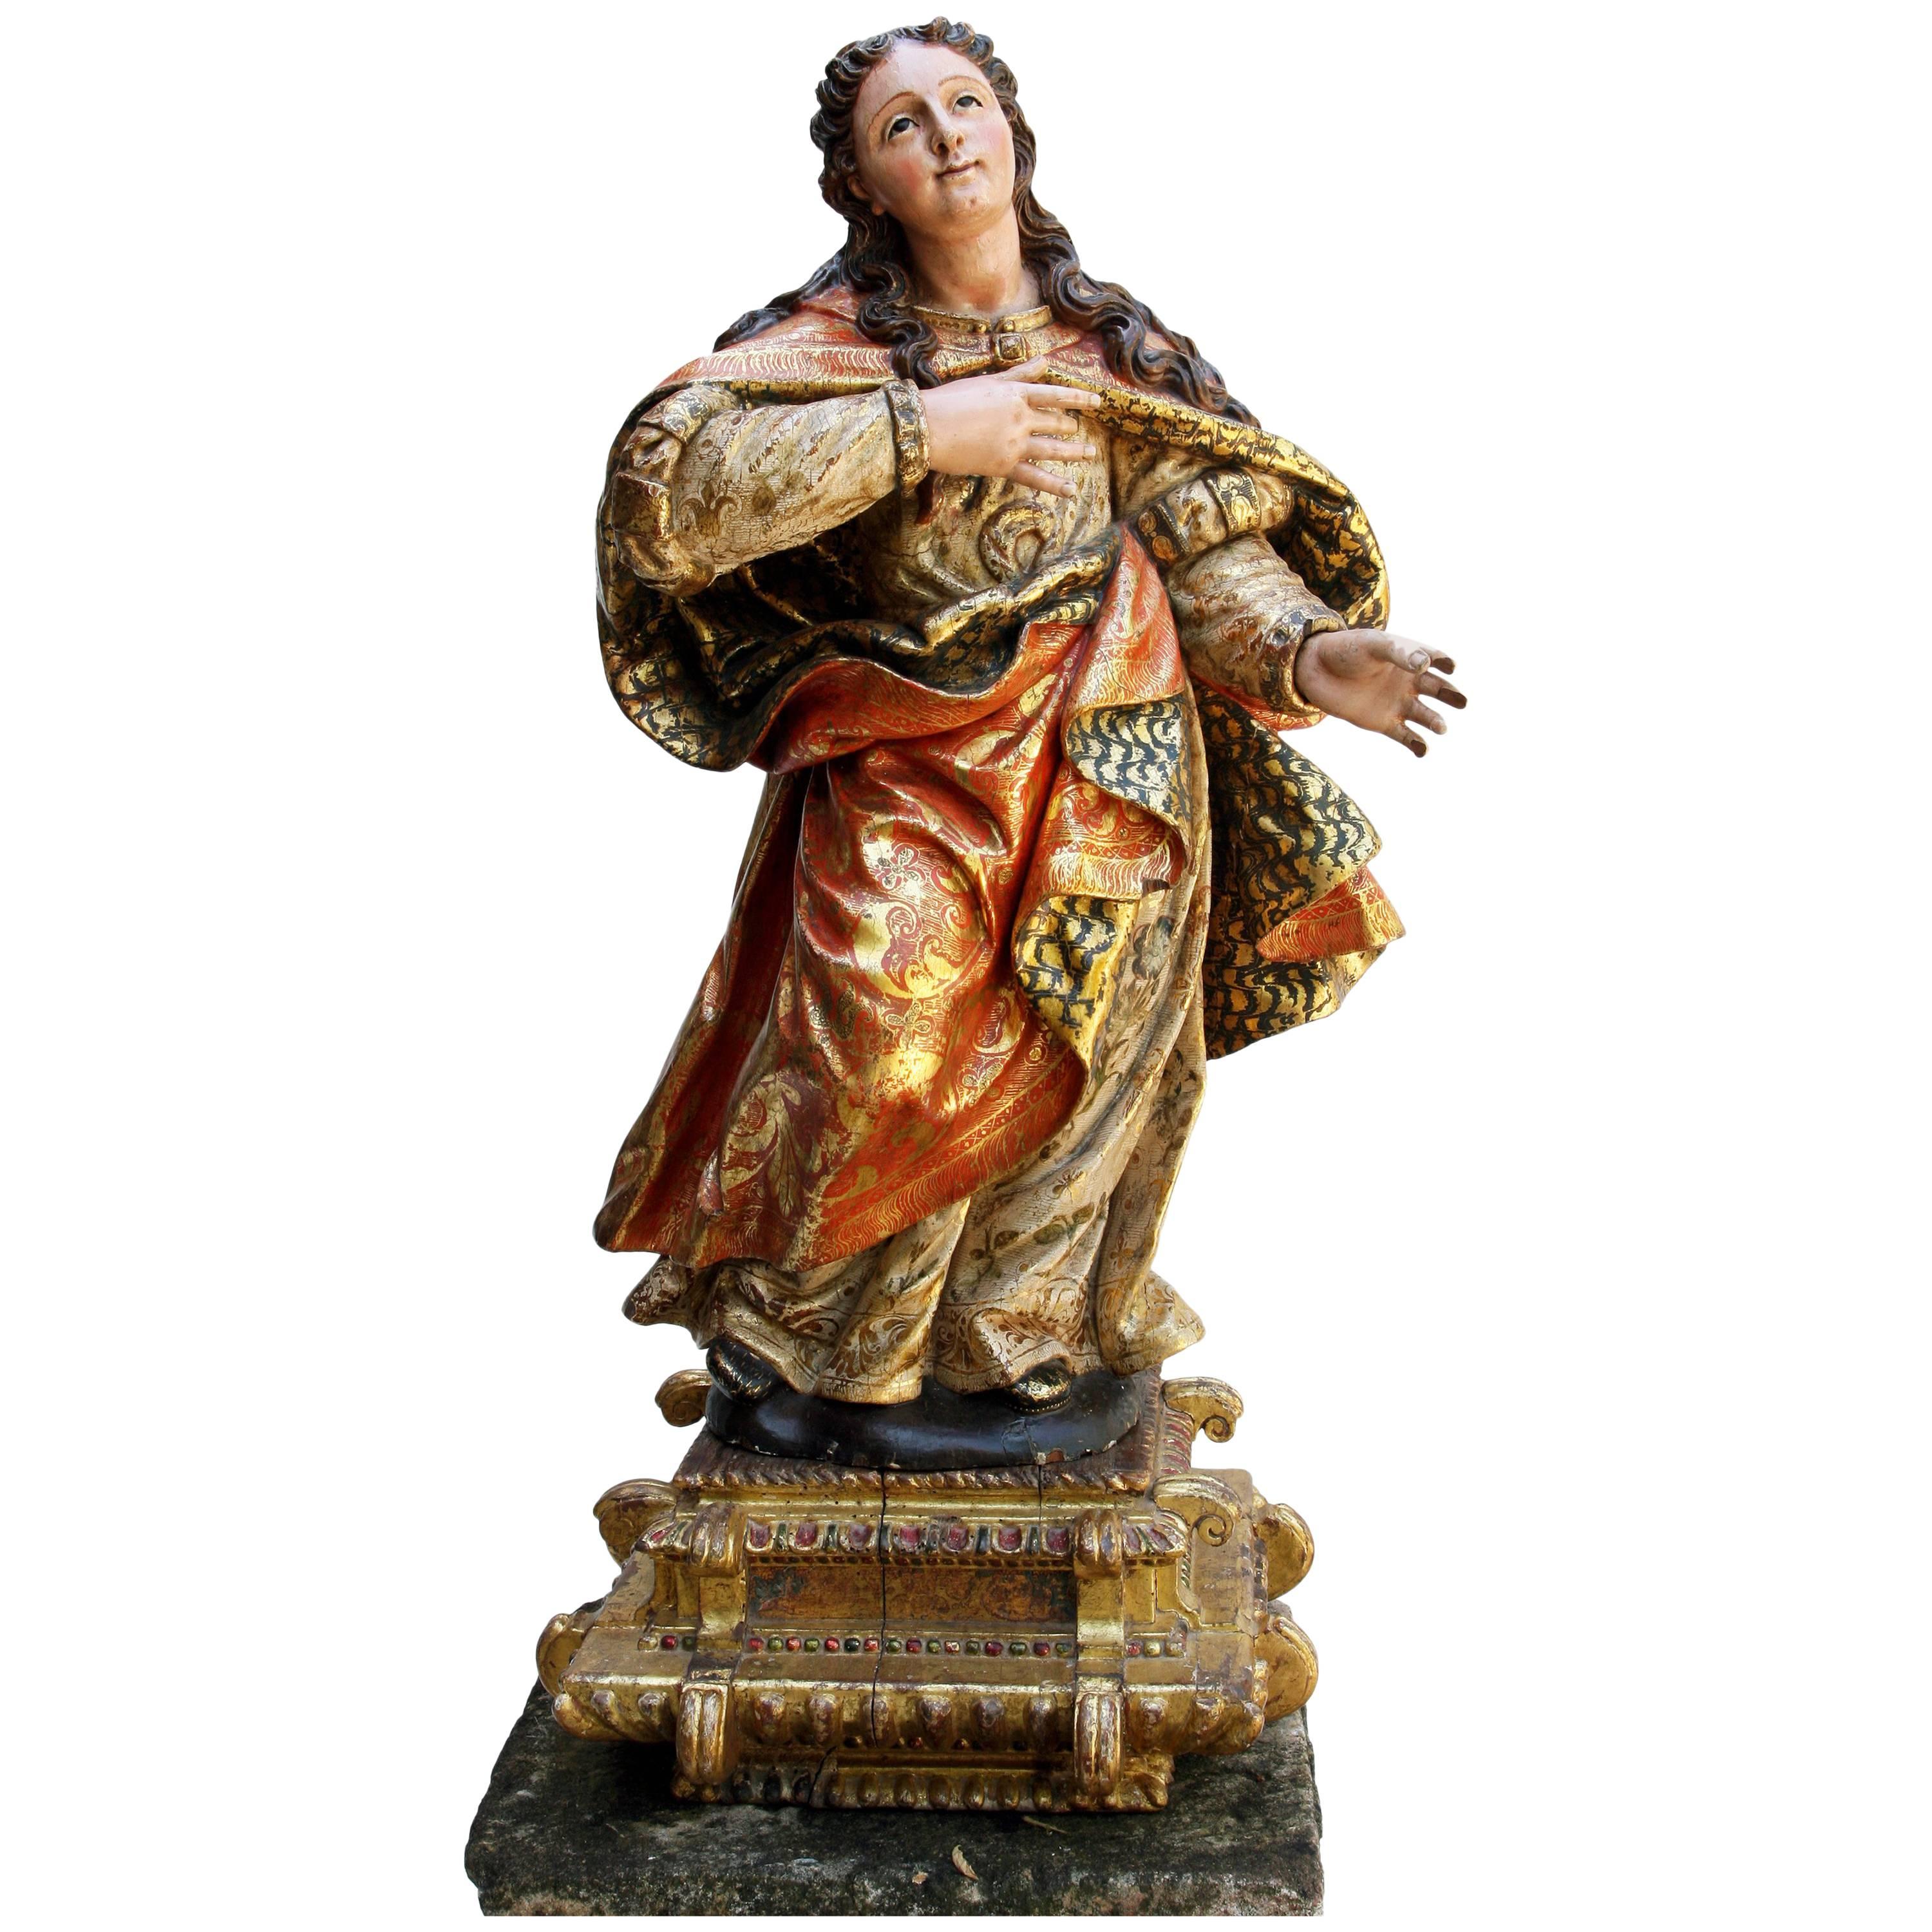 Polychrome Sculpture of the 17th Century, from the Castilian Area